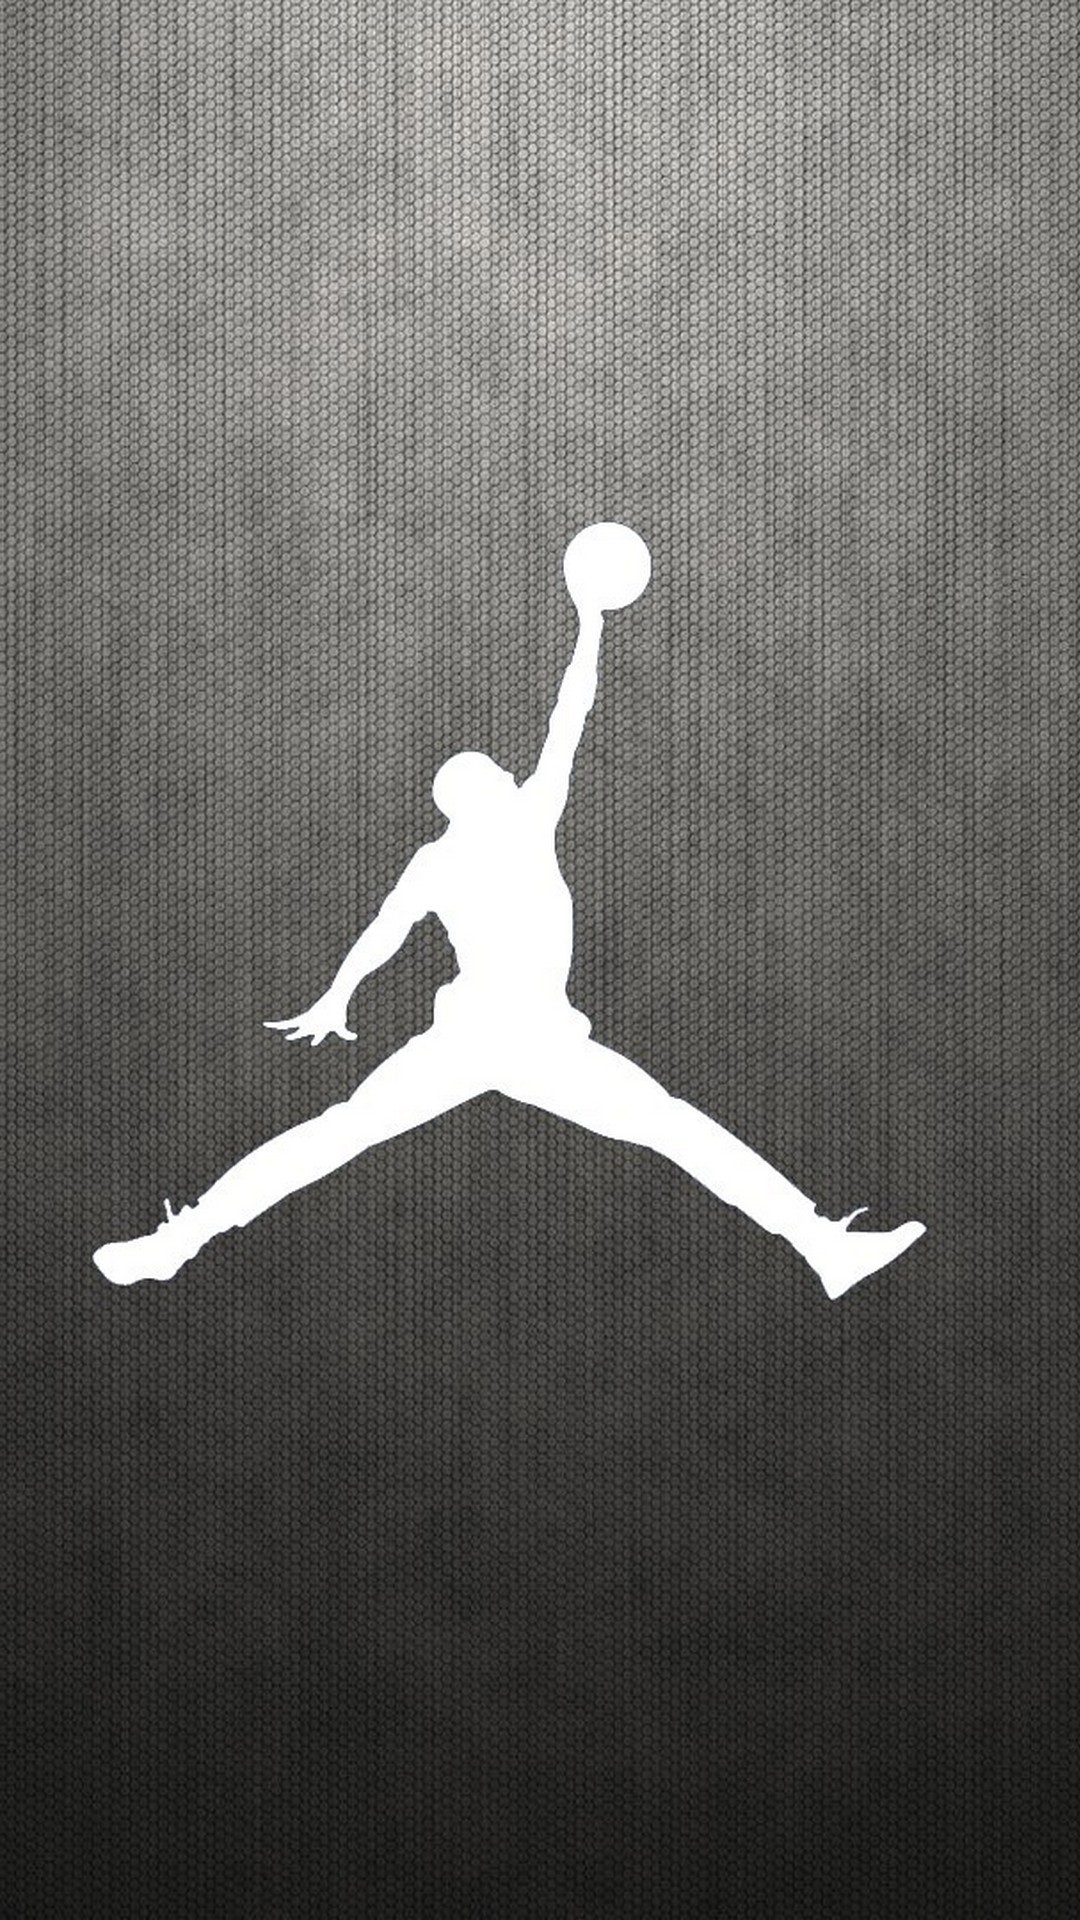 1080x1920 iPhone Wallpaper HD NBA with image dimensions  pixel. You can make  this wallpaper for